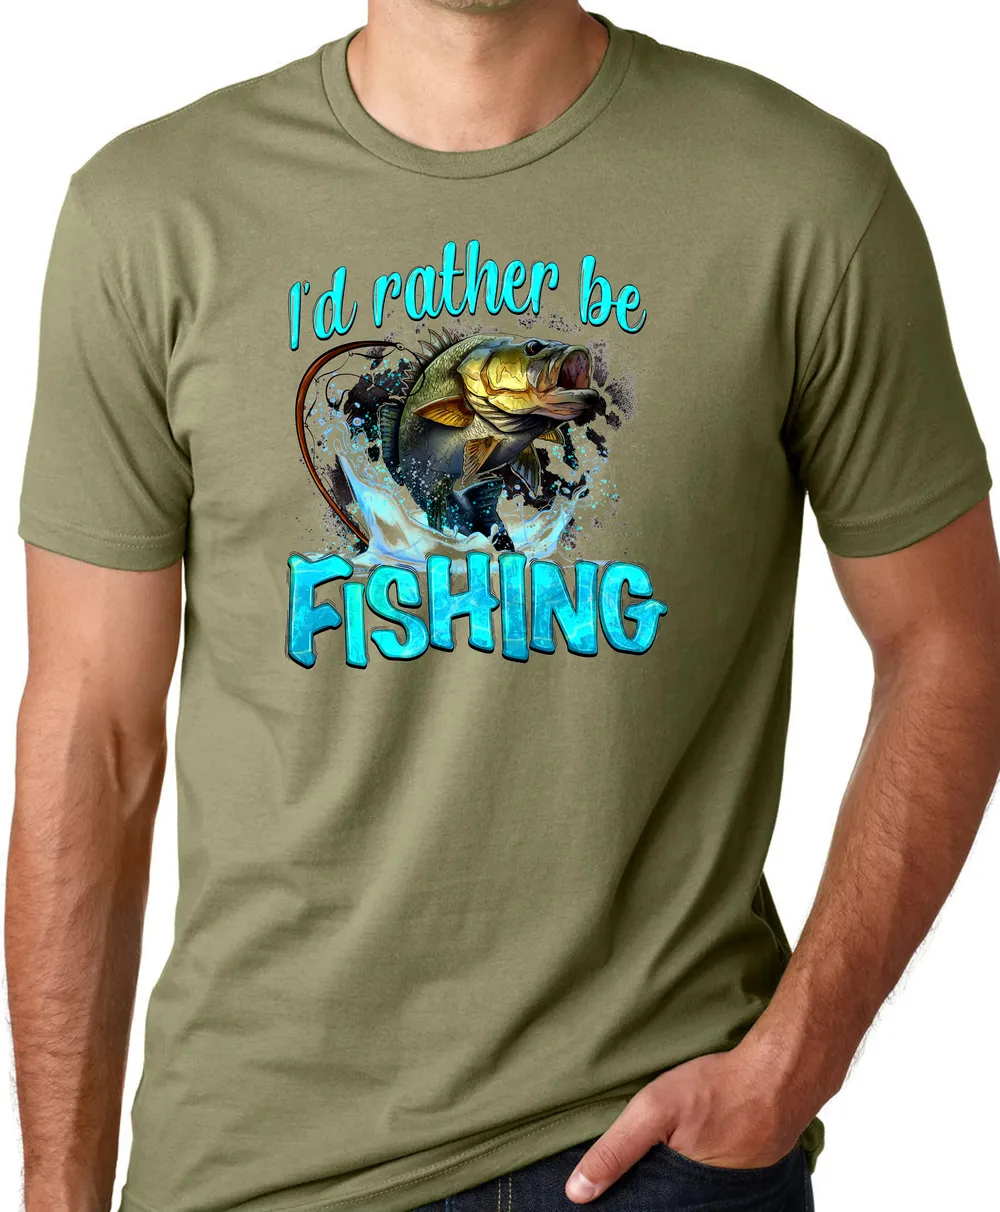 I'd rather be fishing